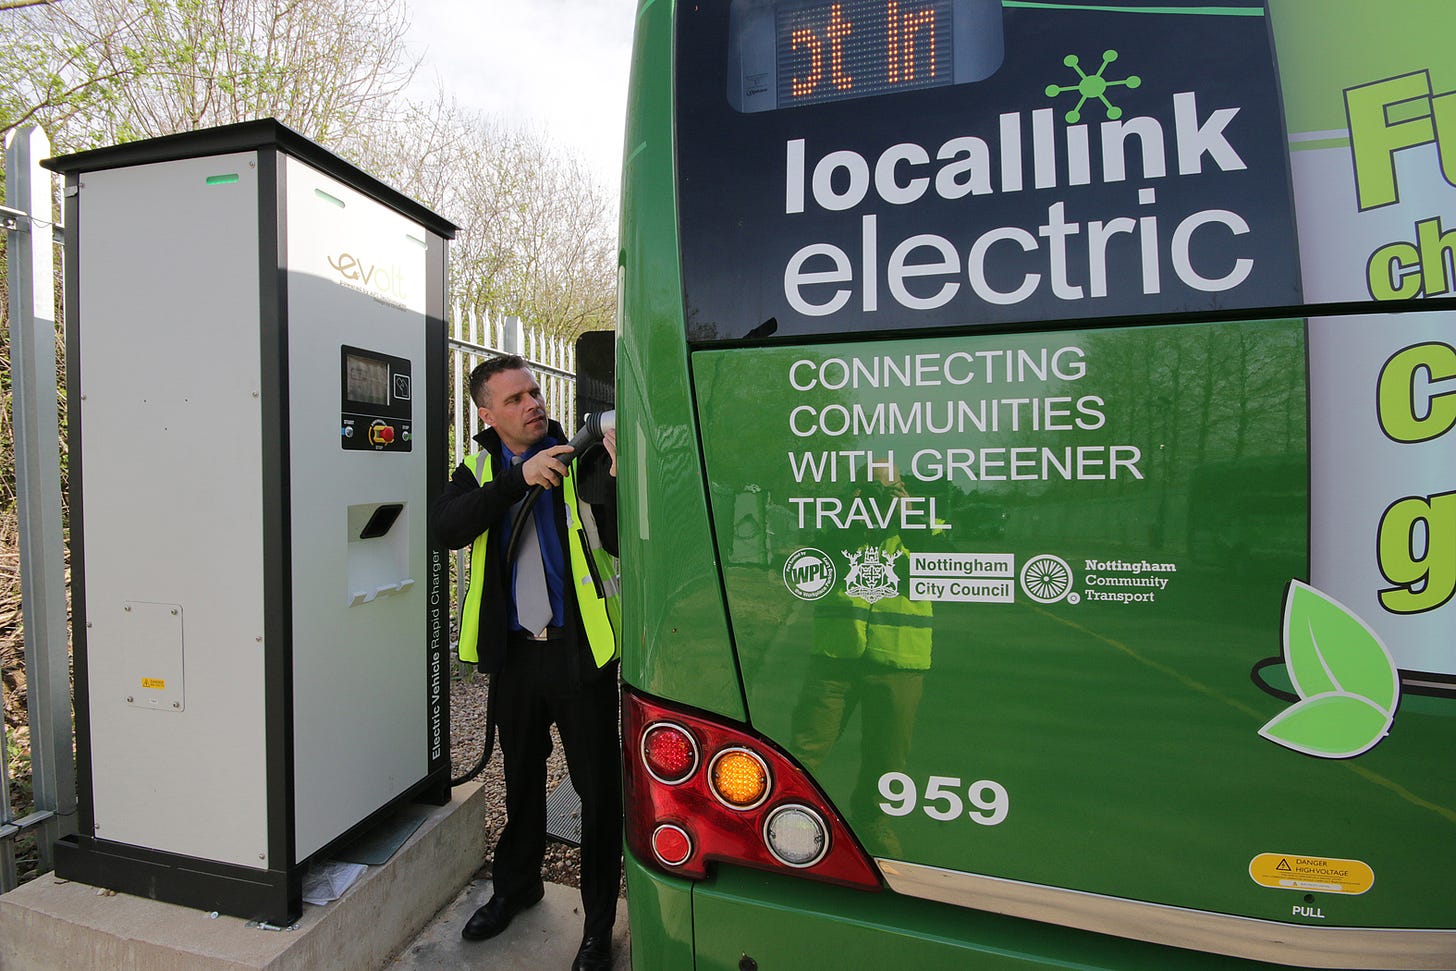 A bus driver charging a green electric bus in Nottingham, UK